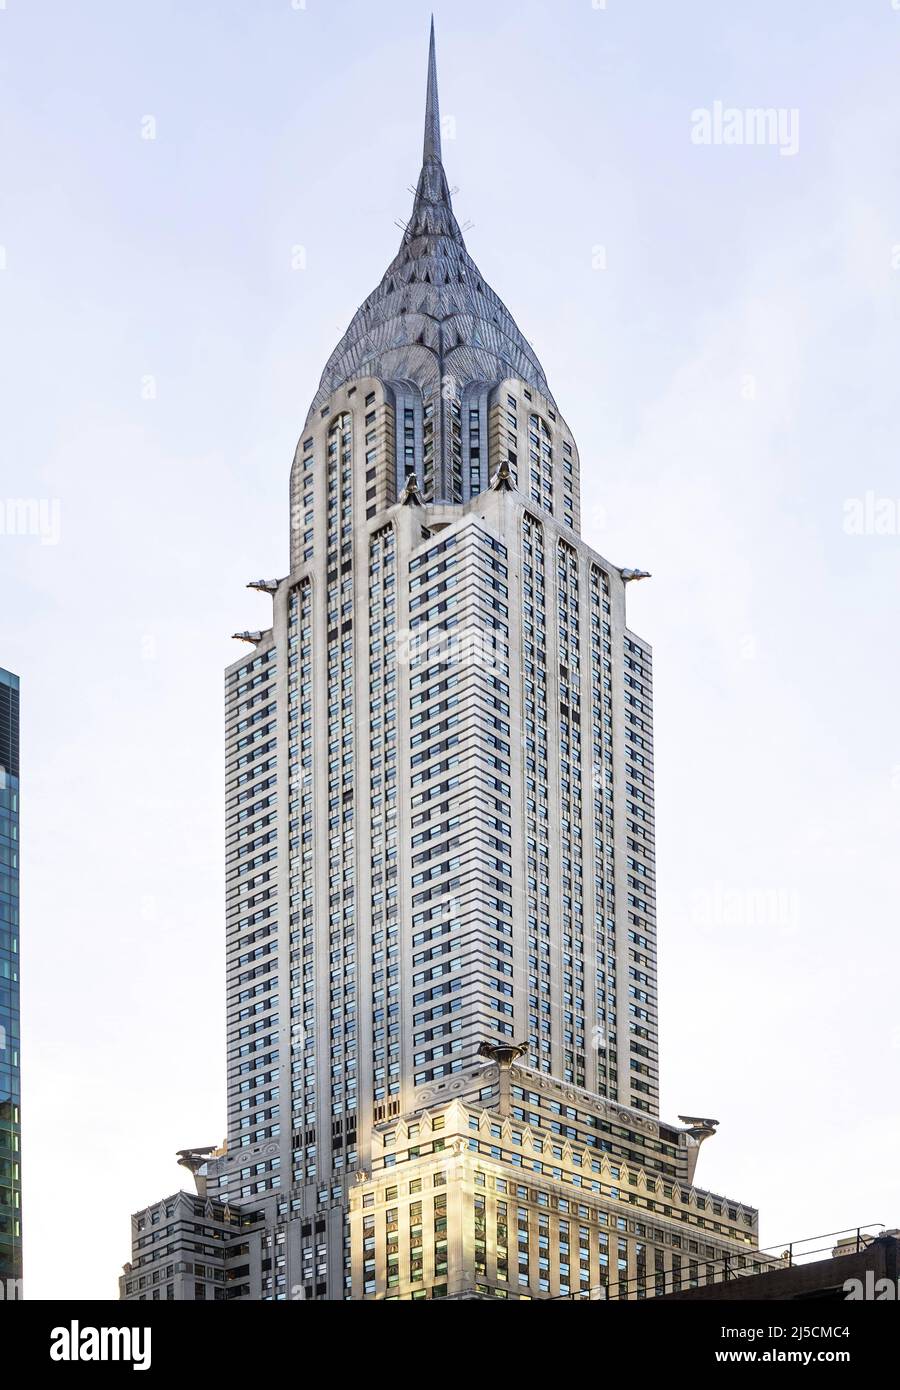 USA, New York, 27.09.2019. Chrysler Building in Manhattan on 27.09.2019. The Chrysler Building is a skyscraper in New York City and is one of the landmarks of the metropolis. Built for the Chrysler Corporation between 1928 and 1930, the building was designed in the Art Deco style by architect William Van Alen. It is one of the most beautiful skyscrapers of that era. [automated translation] Stock Photo